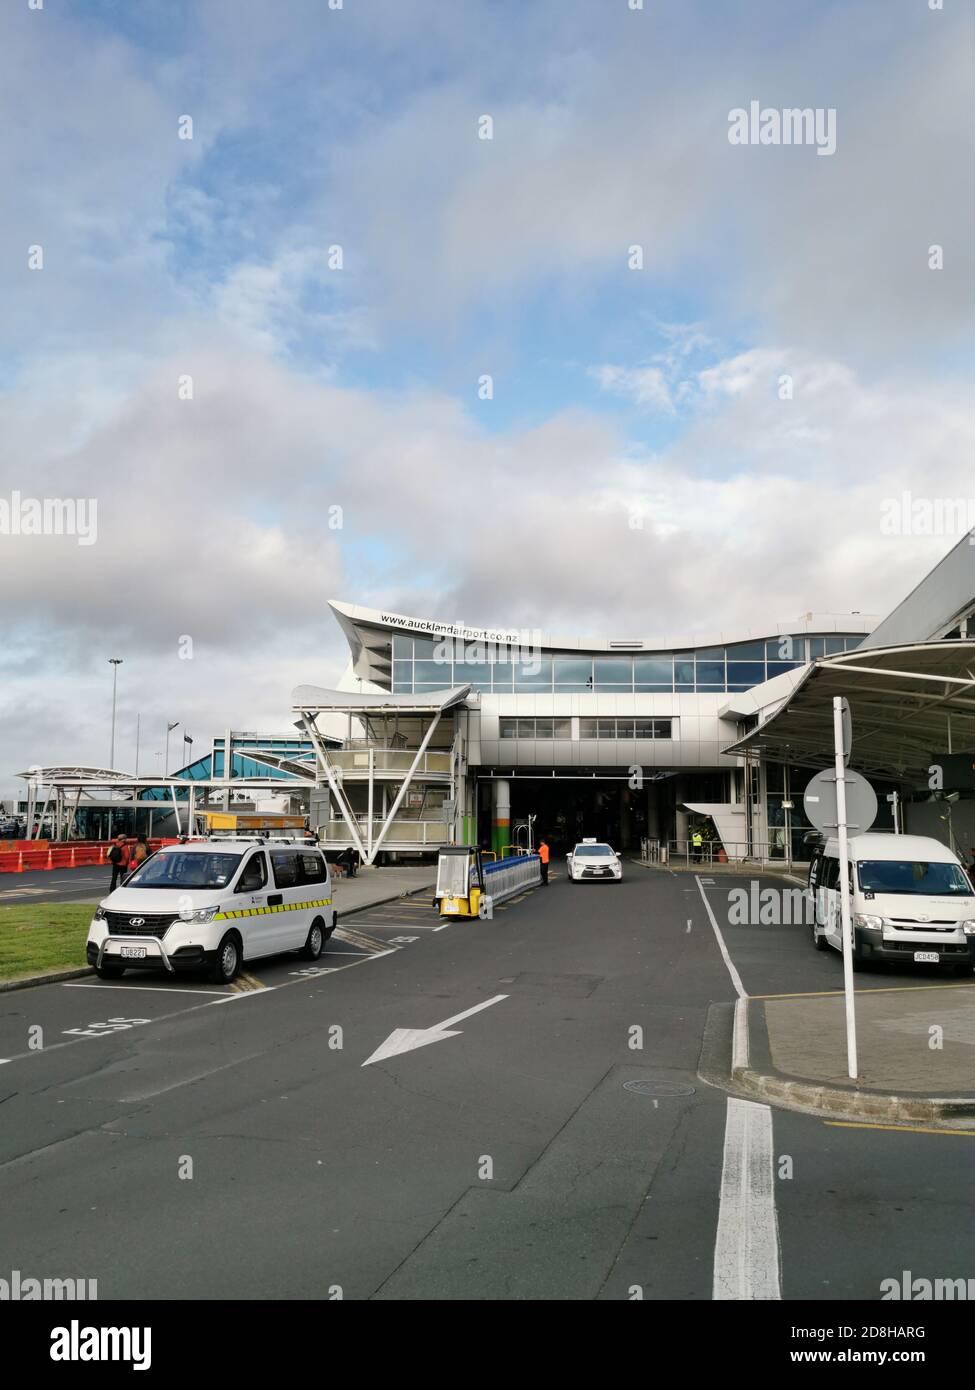 AUCKLAND, NEW ZEALAND - Jul 01, 2019: View of Auckland International Airport building entrance Stock Photo